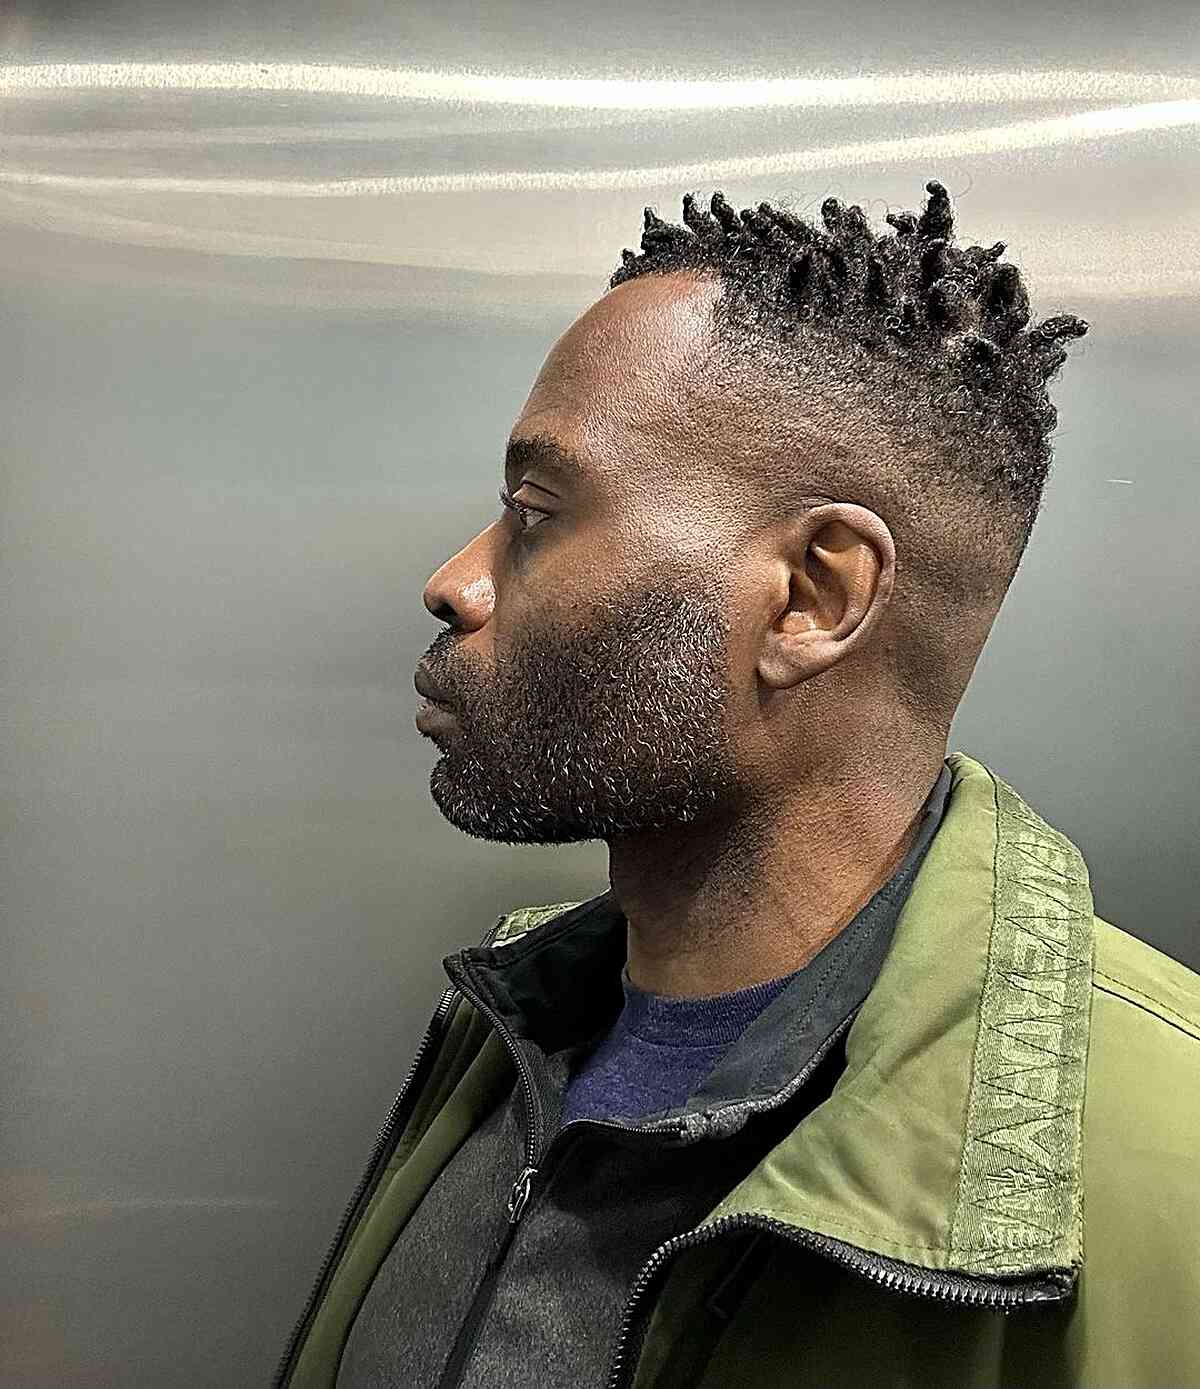 Skin Fade Twist Hairstyle for Men's Freeform Dreads Short Hair